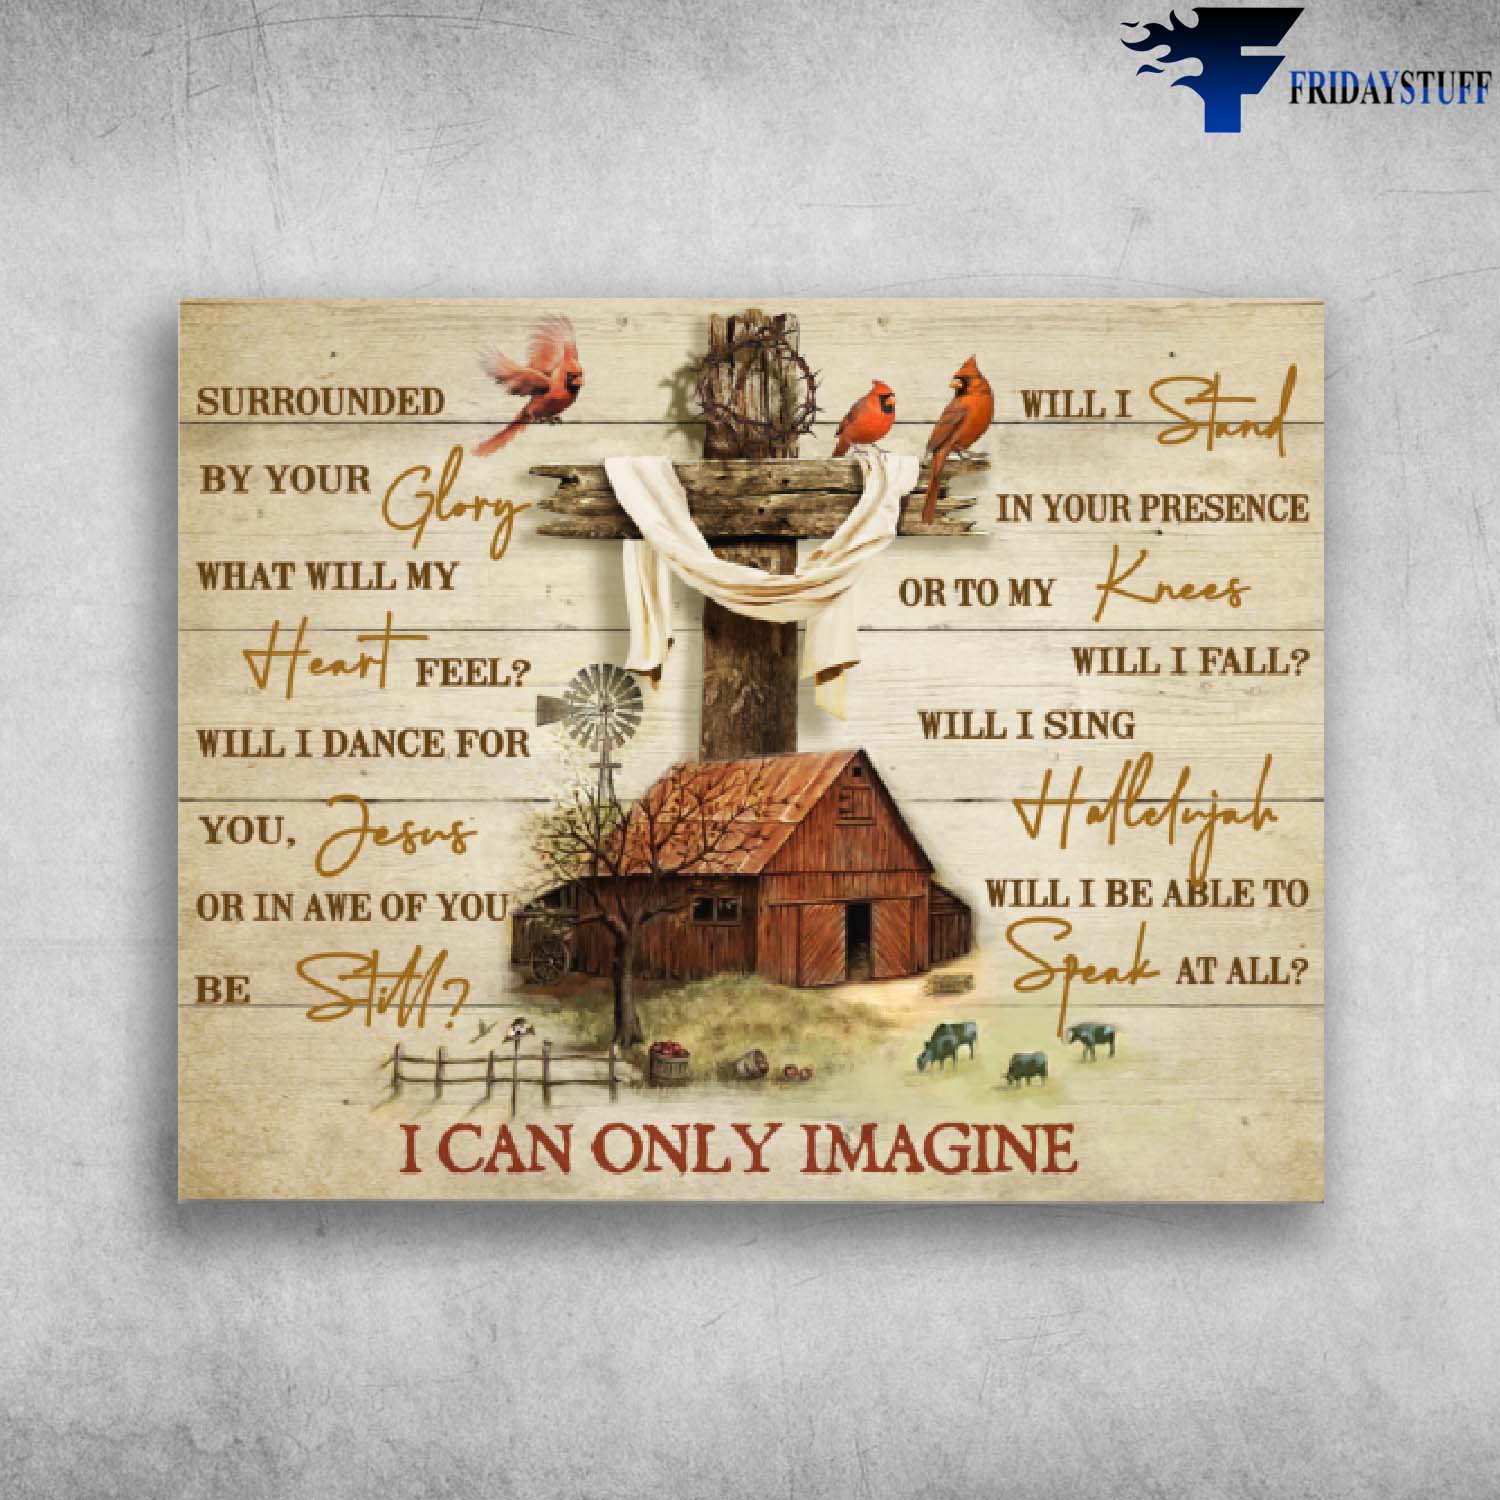 I Can Only Imagine Surrounded By Your Glory MercyMe The Worship Project 1999